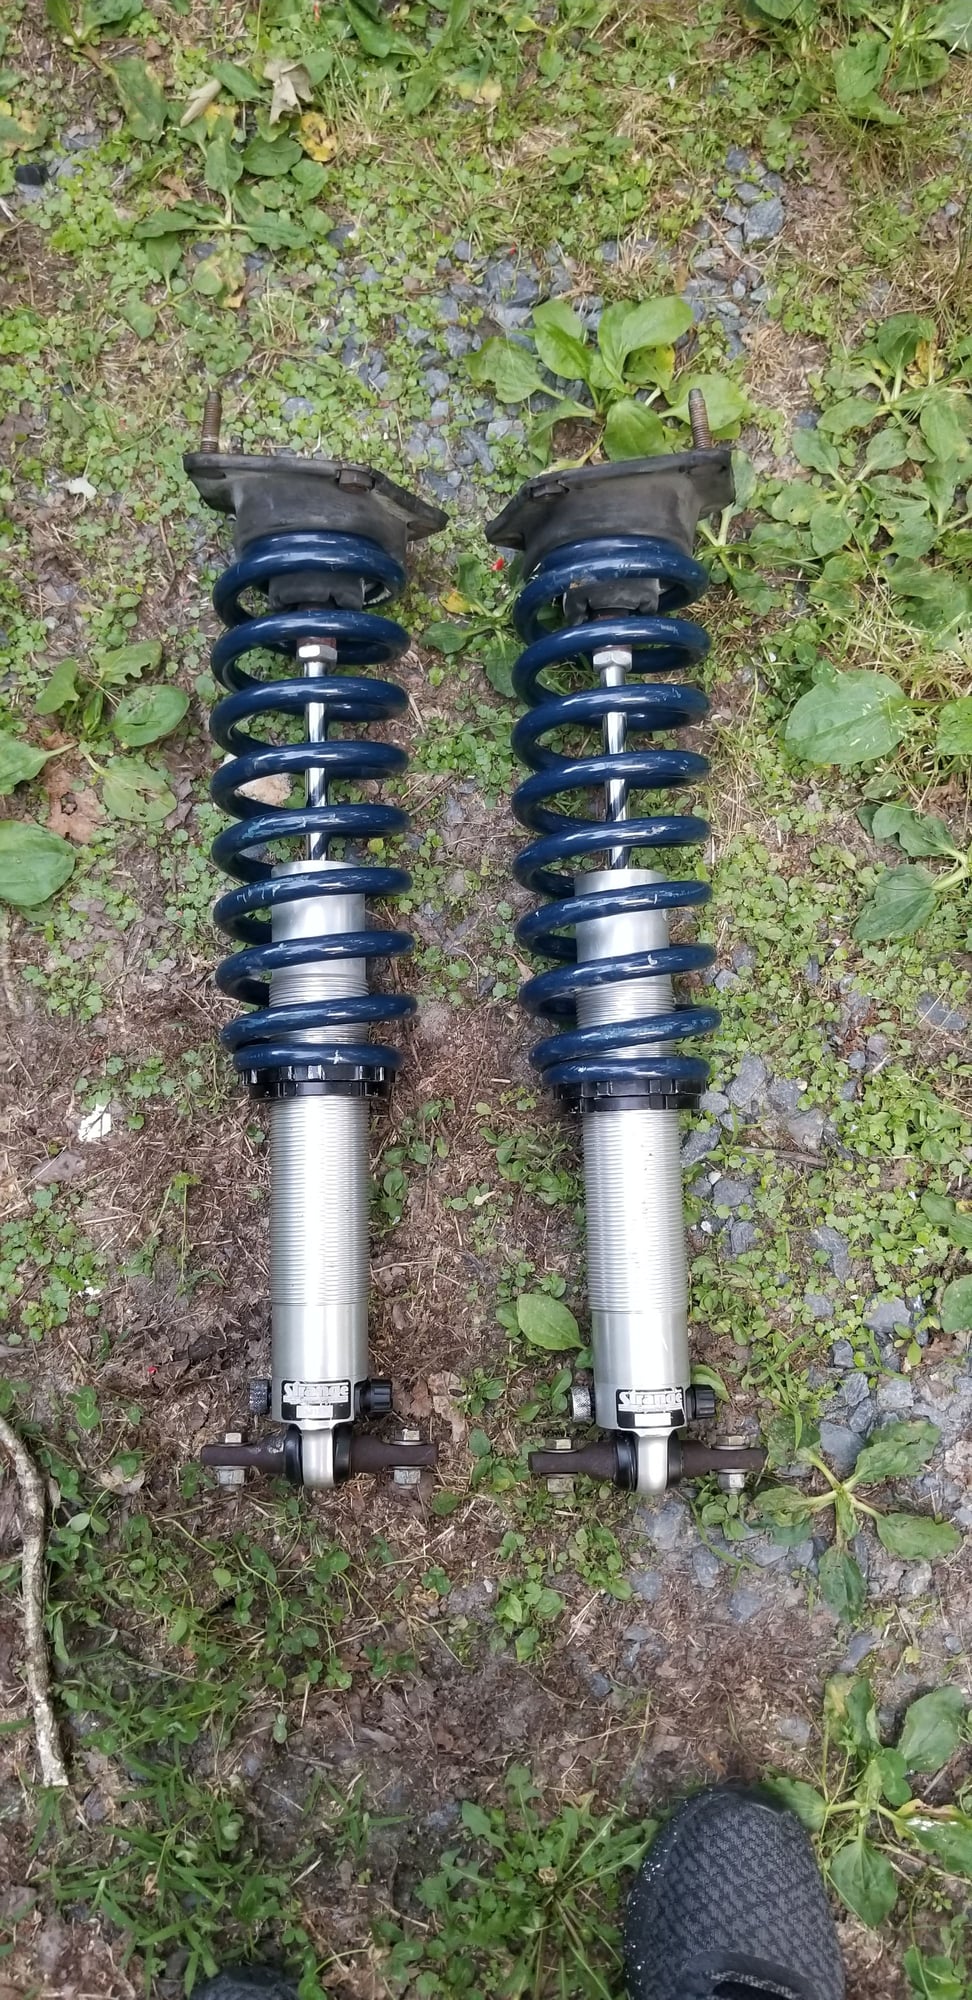  - UMI double adj lower A arms and strange double adj coilovers front - Asheboro, NC 27341, United States